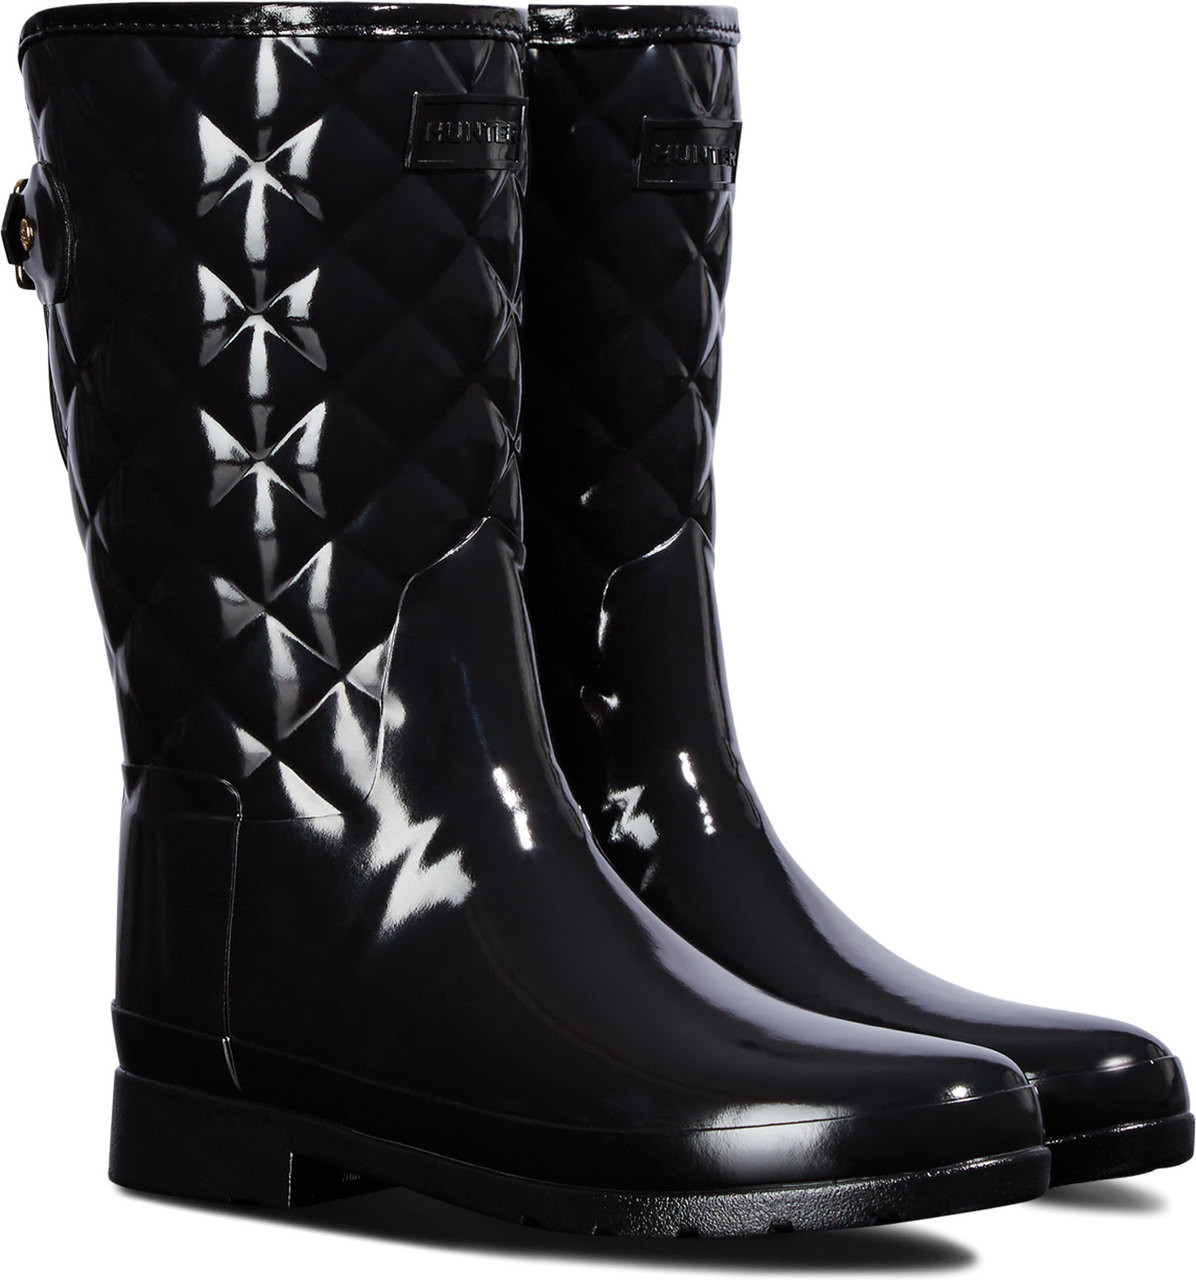 women's refined slim fit quilted gloss chelsea boots